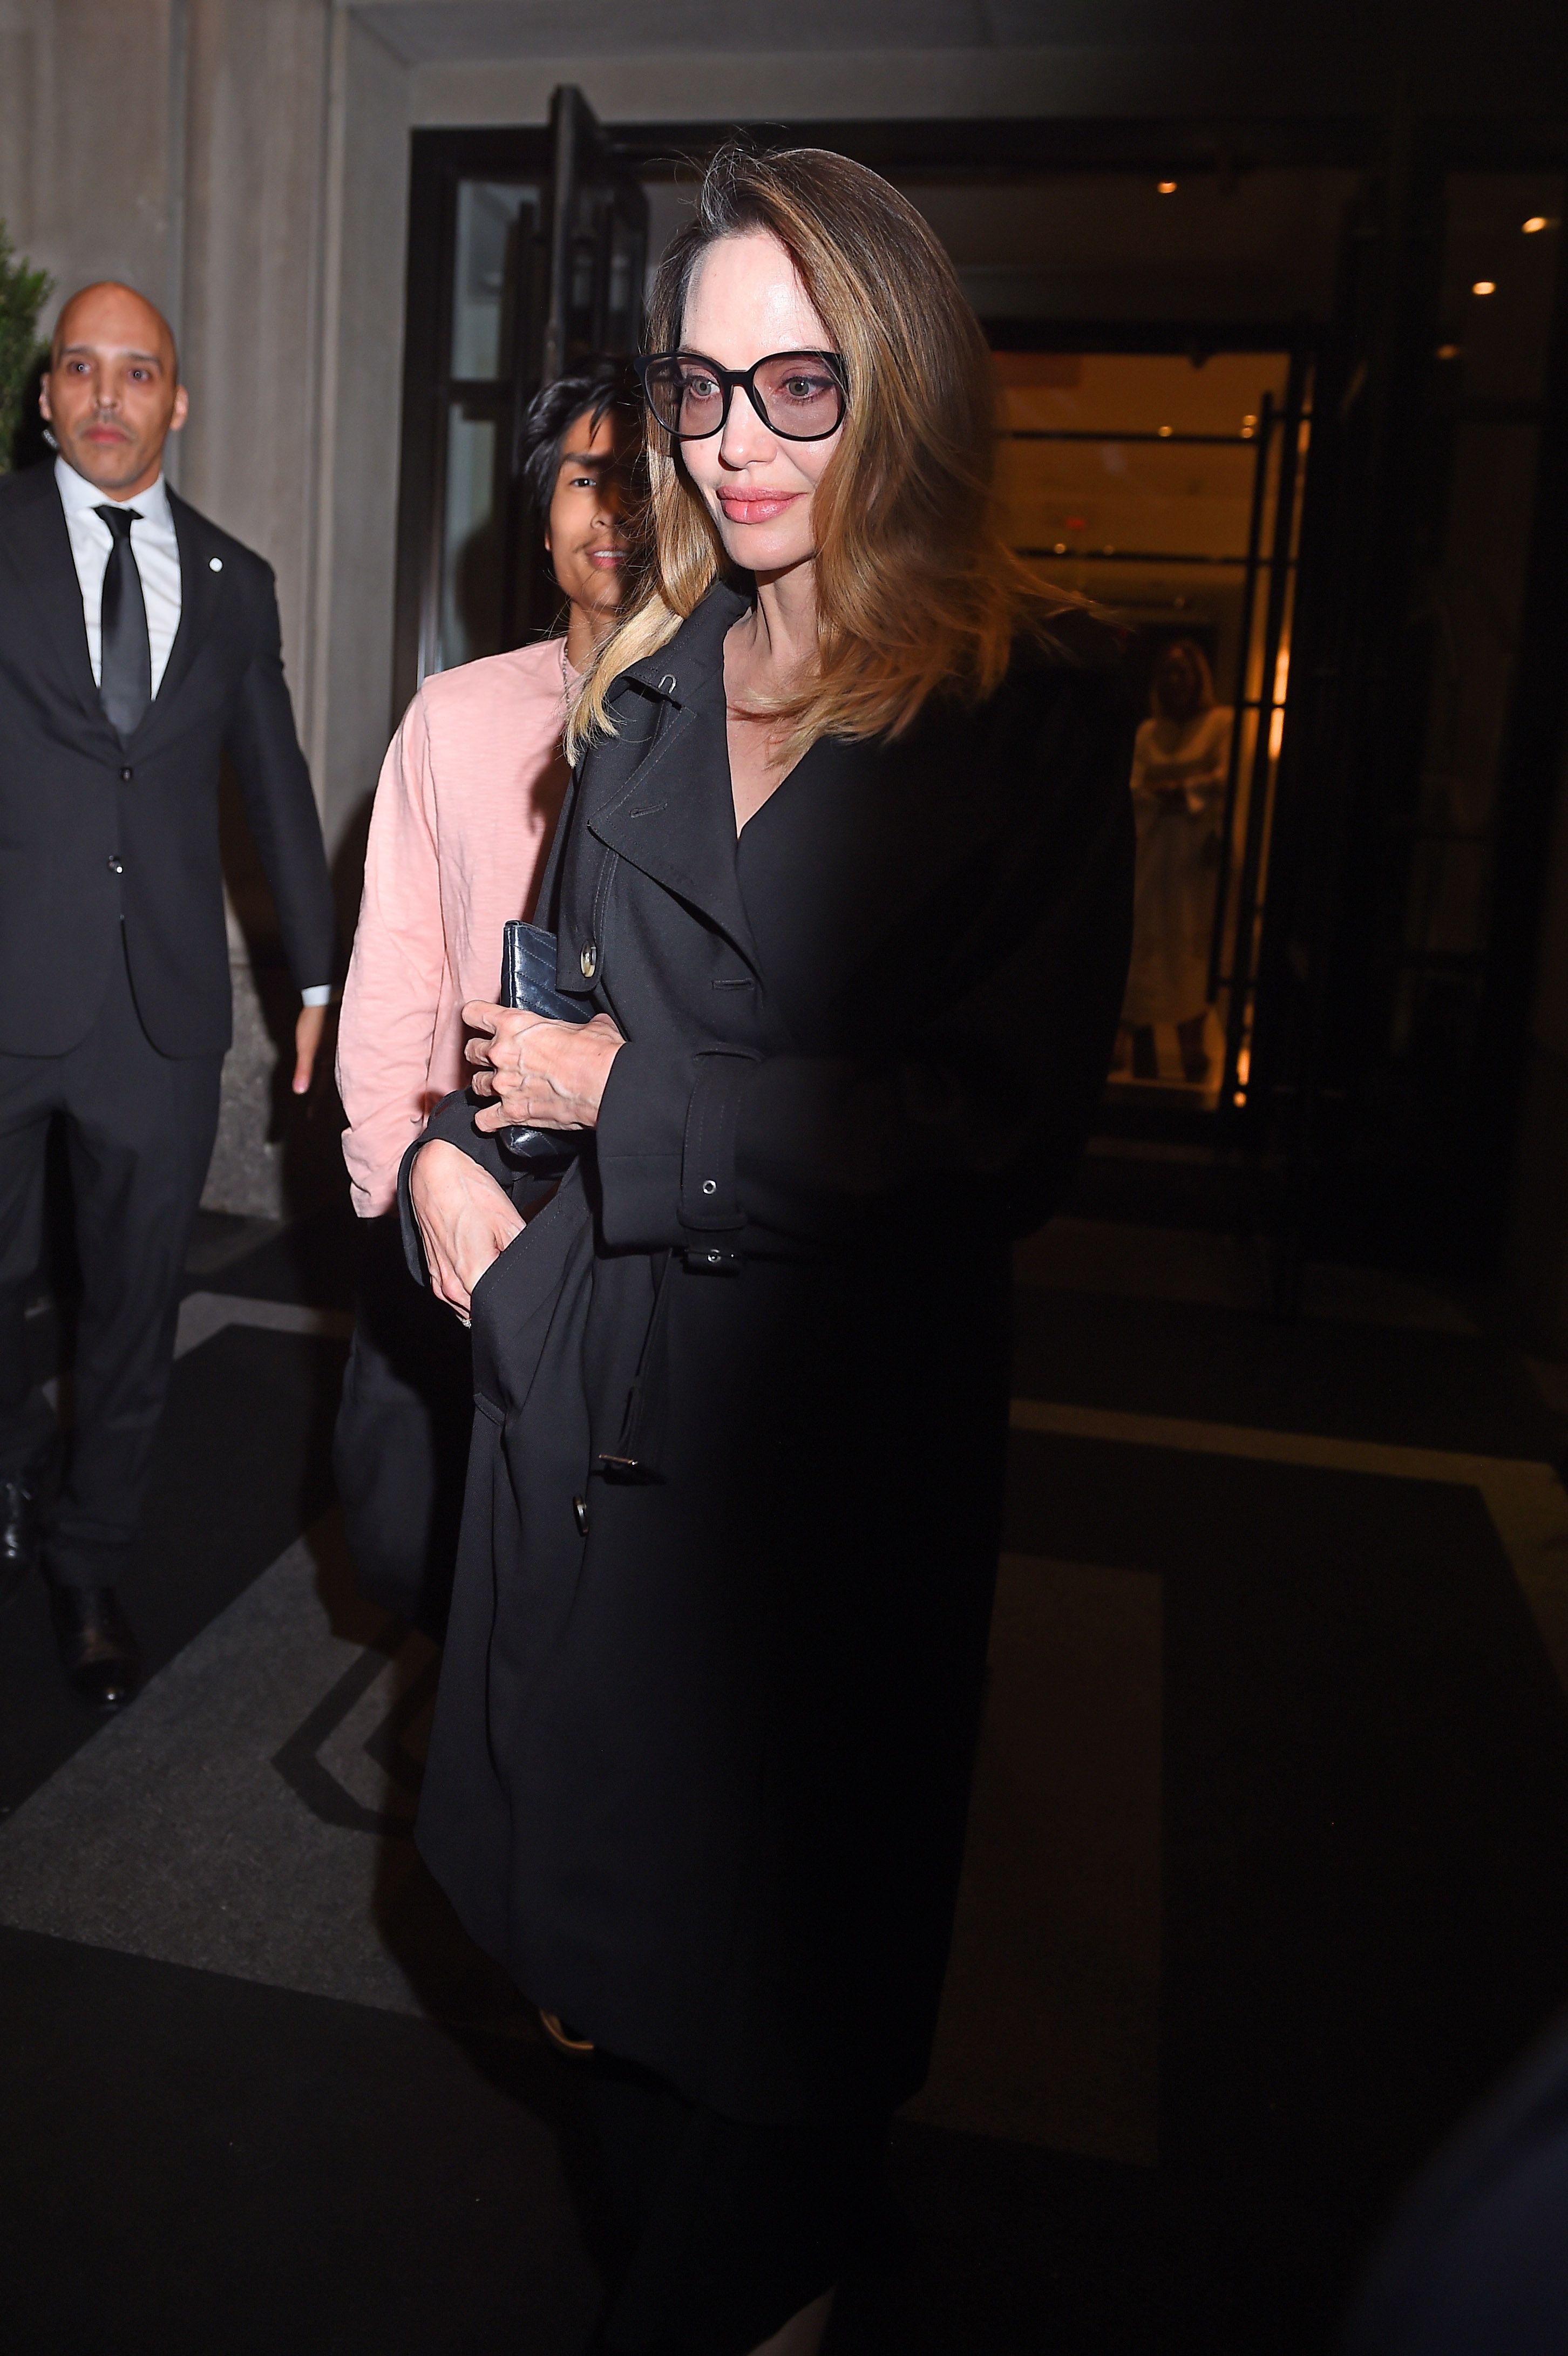 Angelina Jolie in a Chic Long Black Overcoat and Carrying a Dior